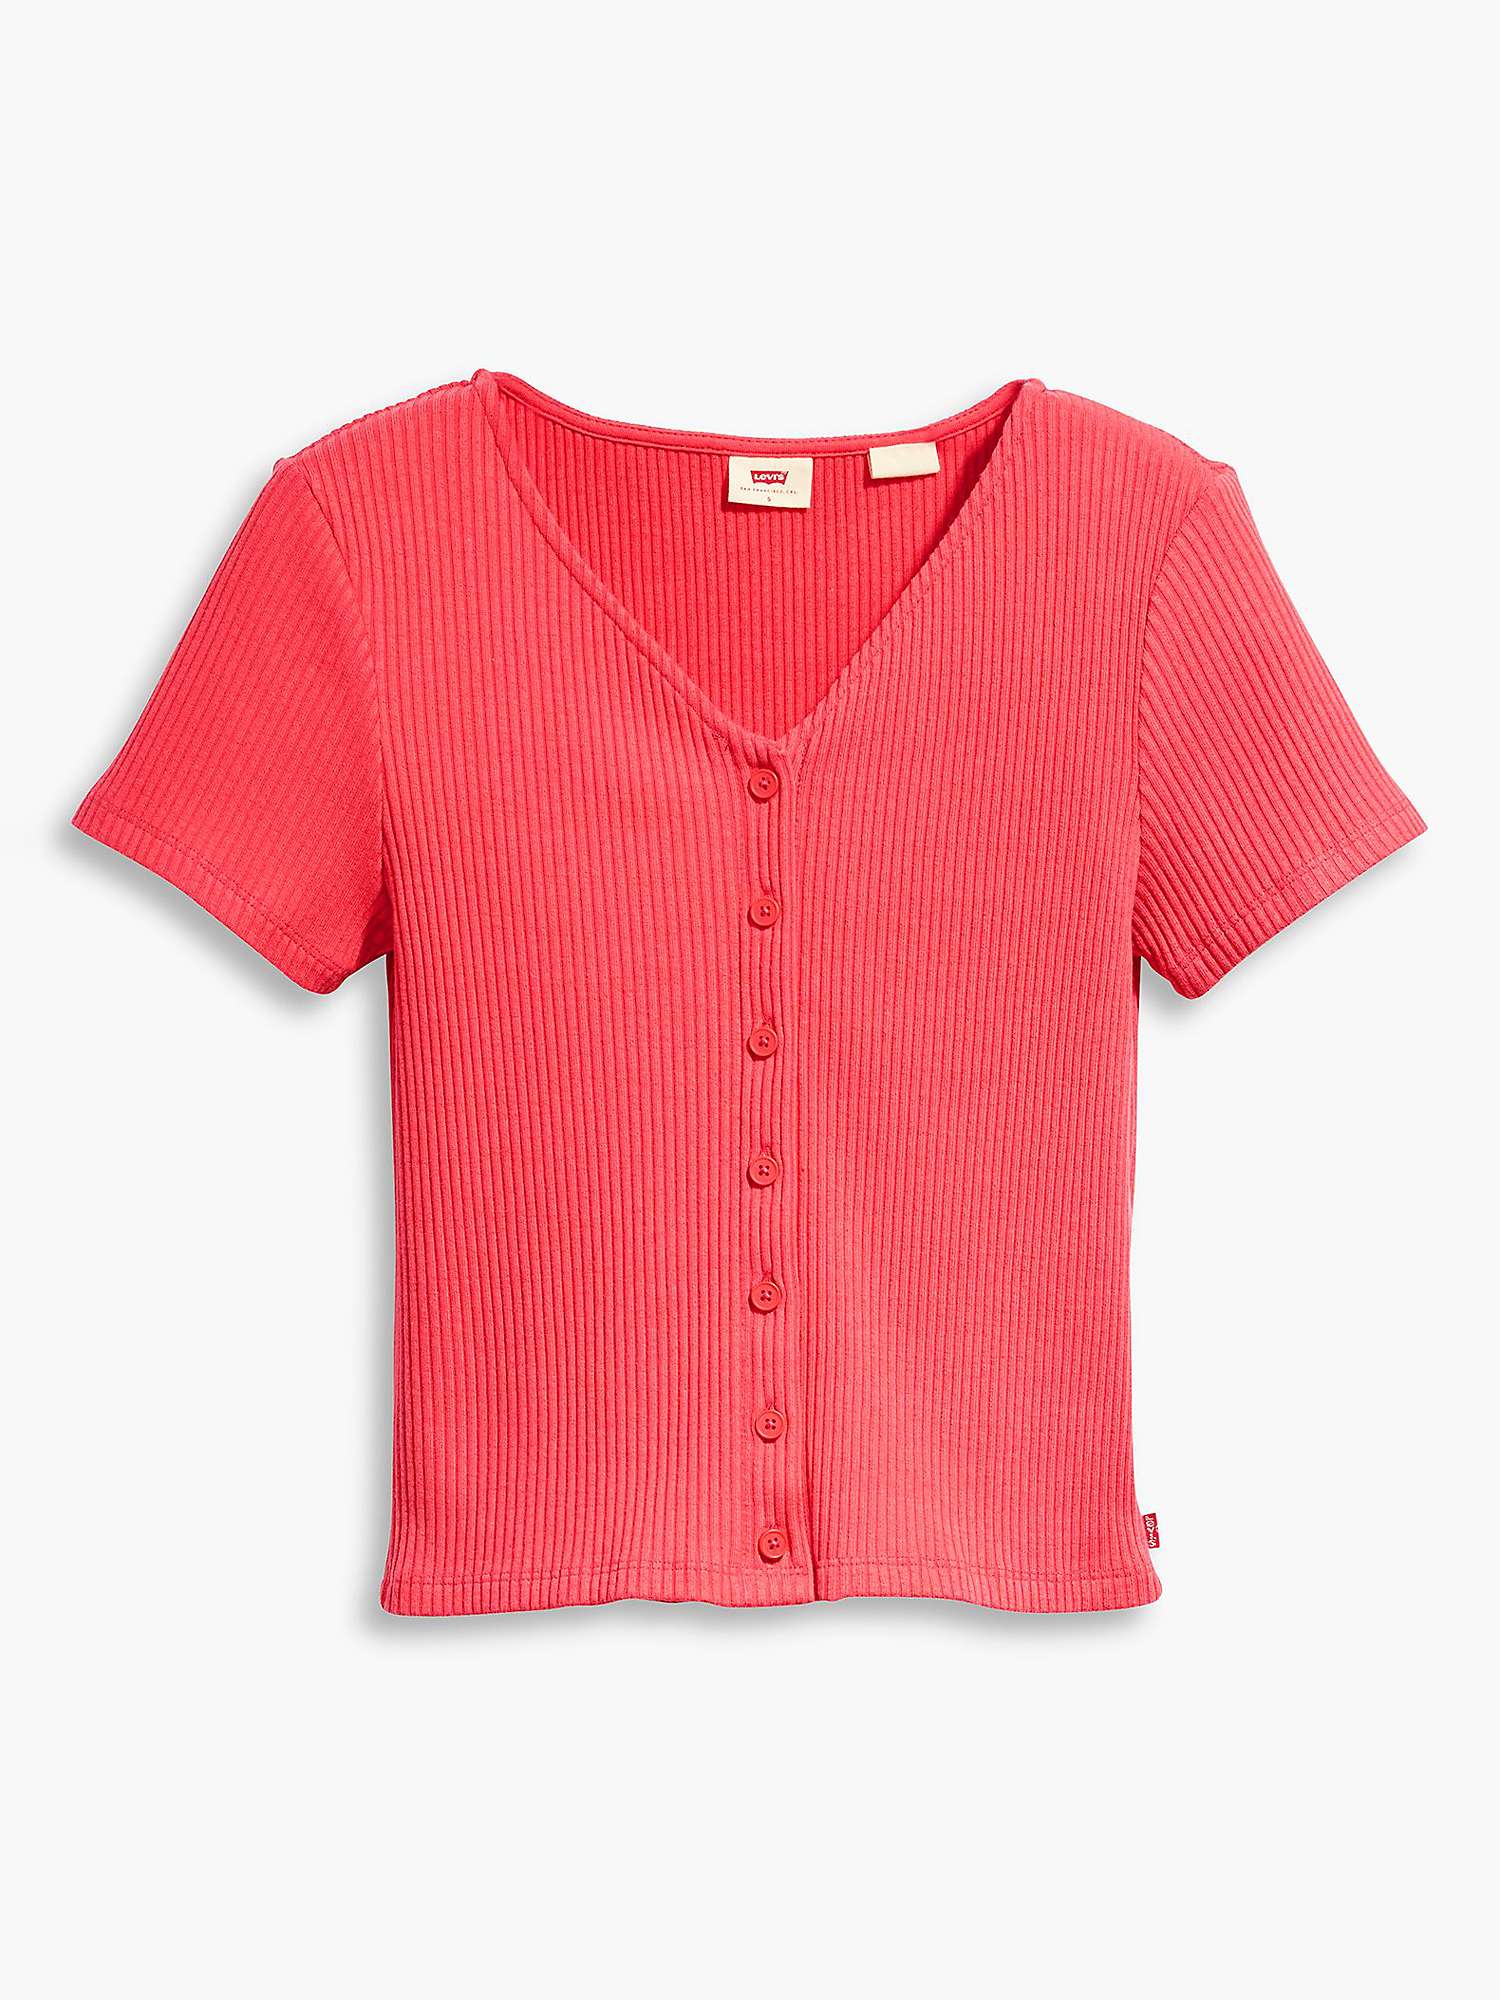 Buy Levi's Monica Button Front Short Sleeve Top Online at johnlewis.com